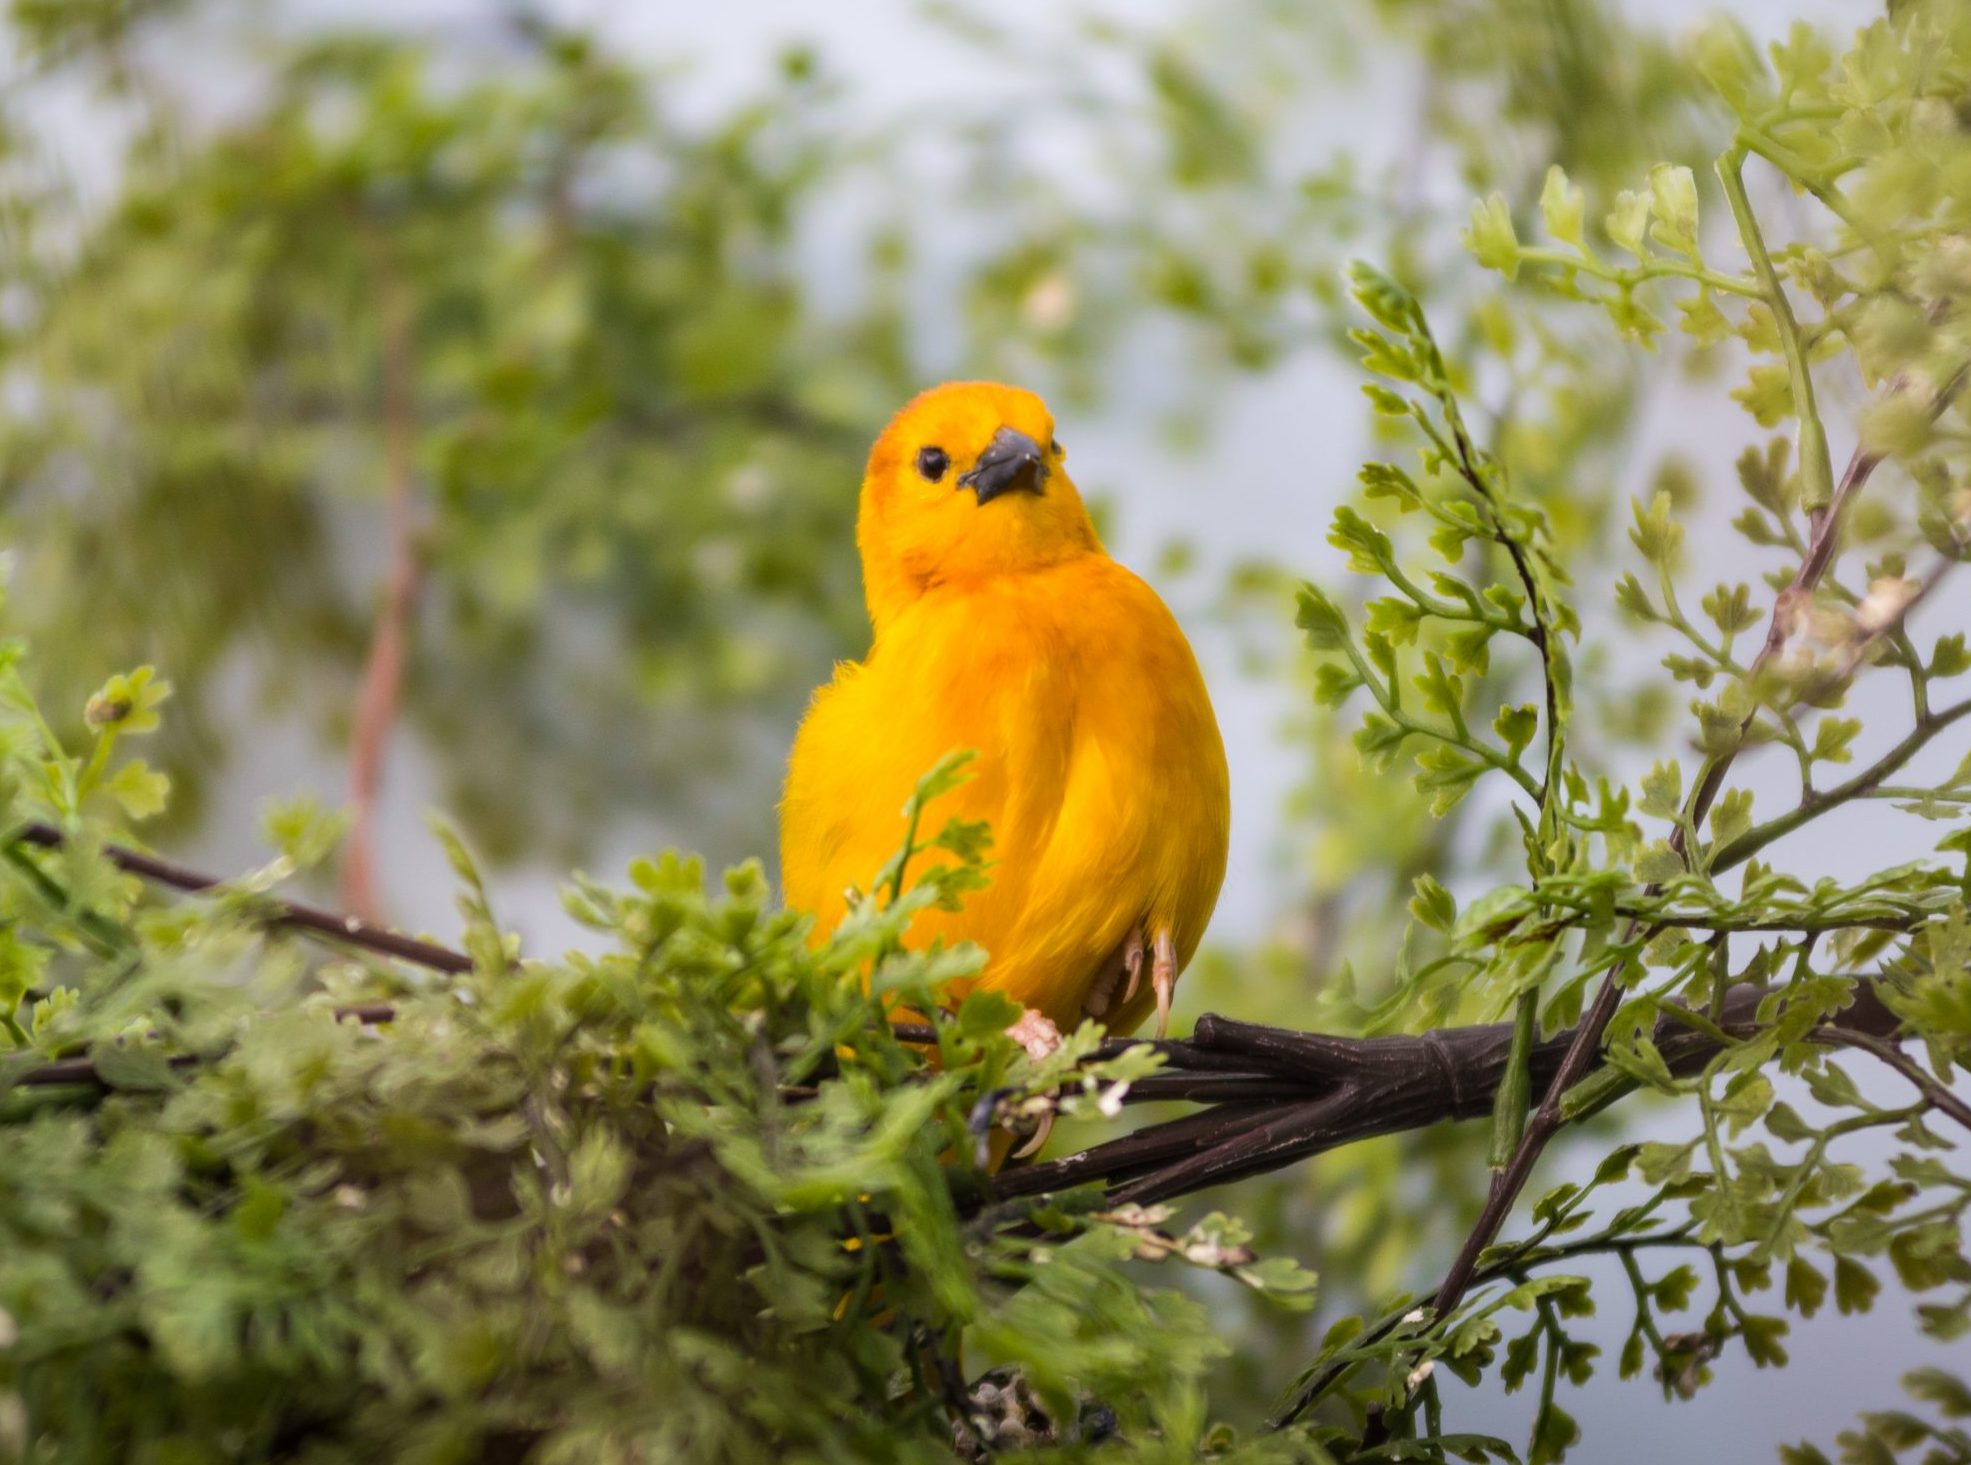 Taveta Golden Weaver perched on a branch